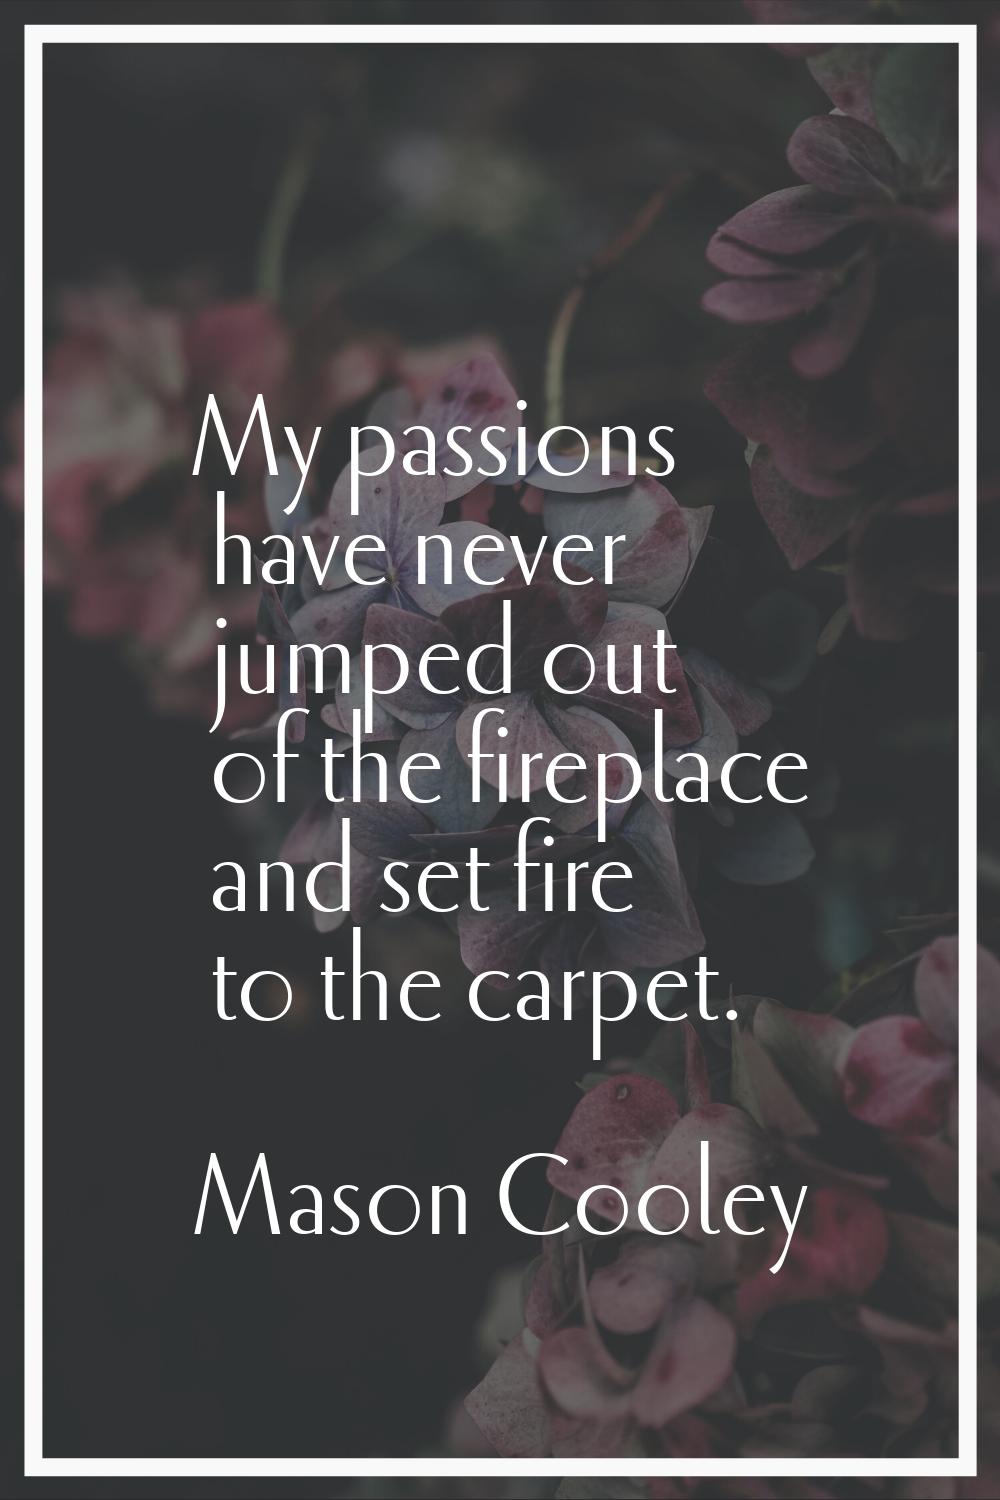 My passions have never jumped out of the fireplace and set fire to the carpet.